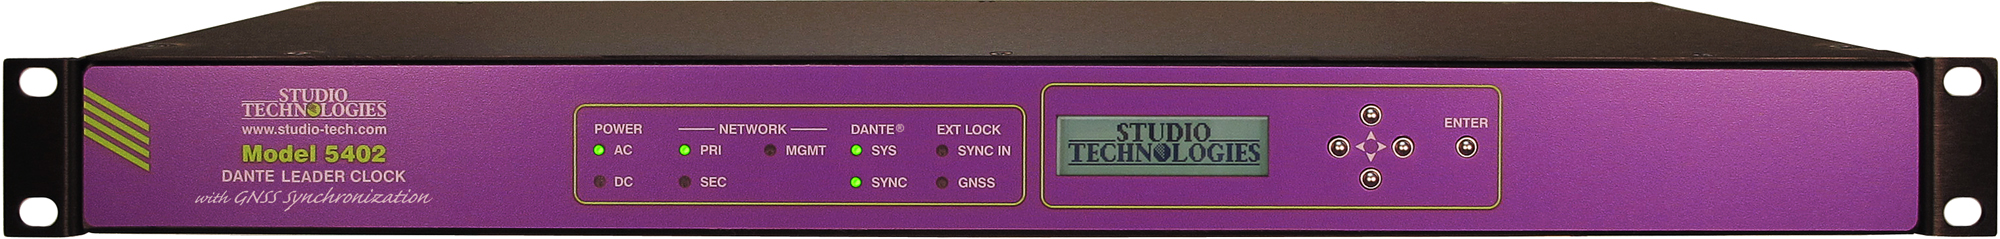 Model 5402 Dante Leader Clock with GNSS Synchronization